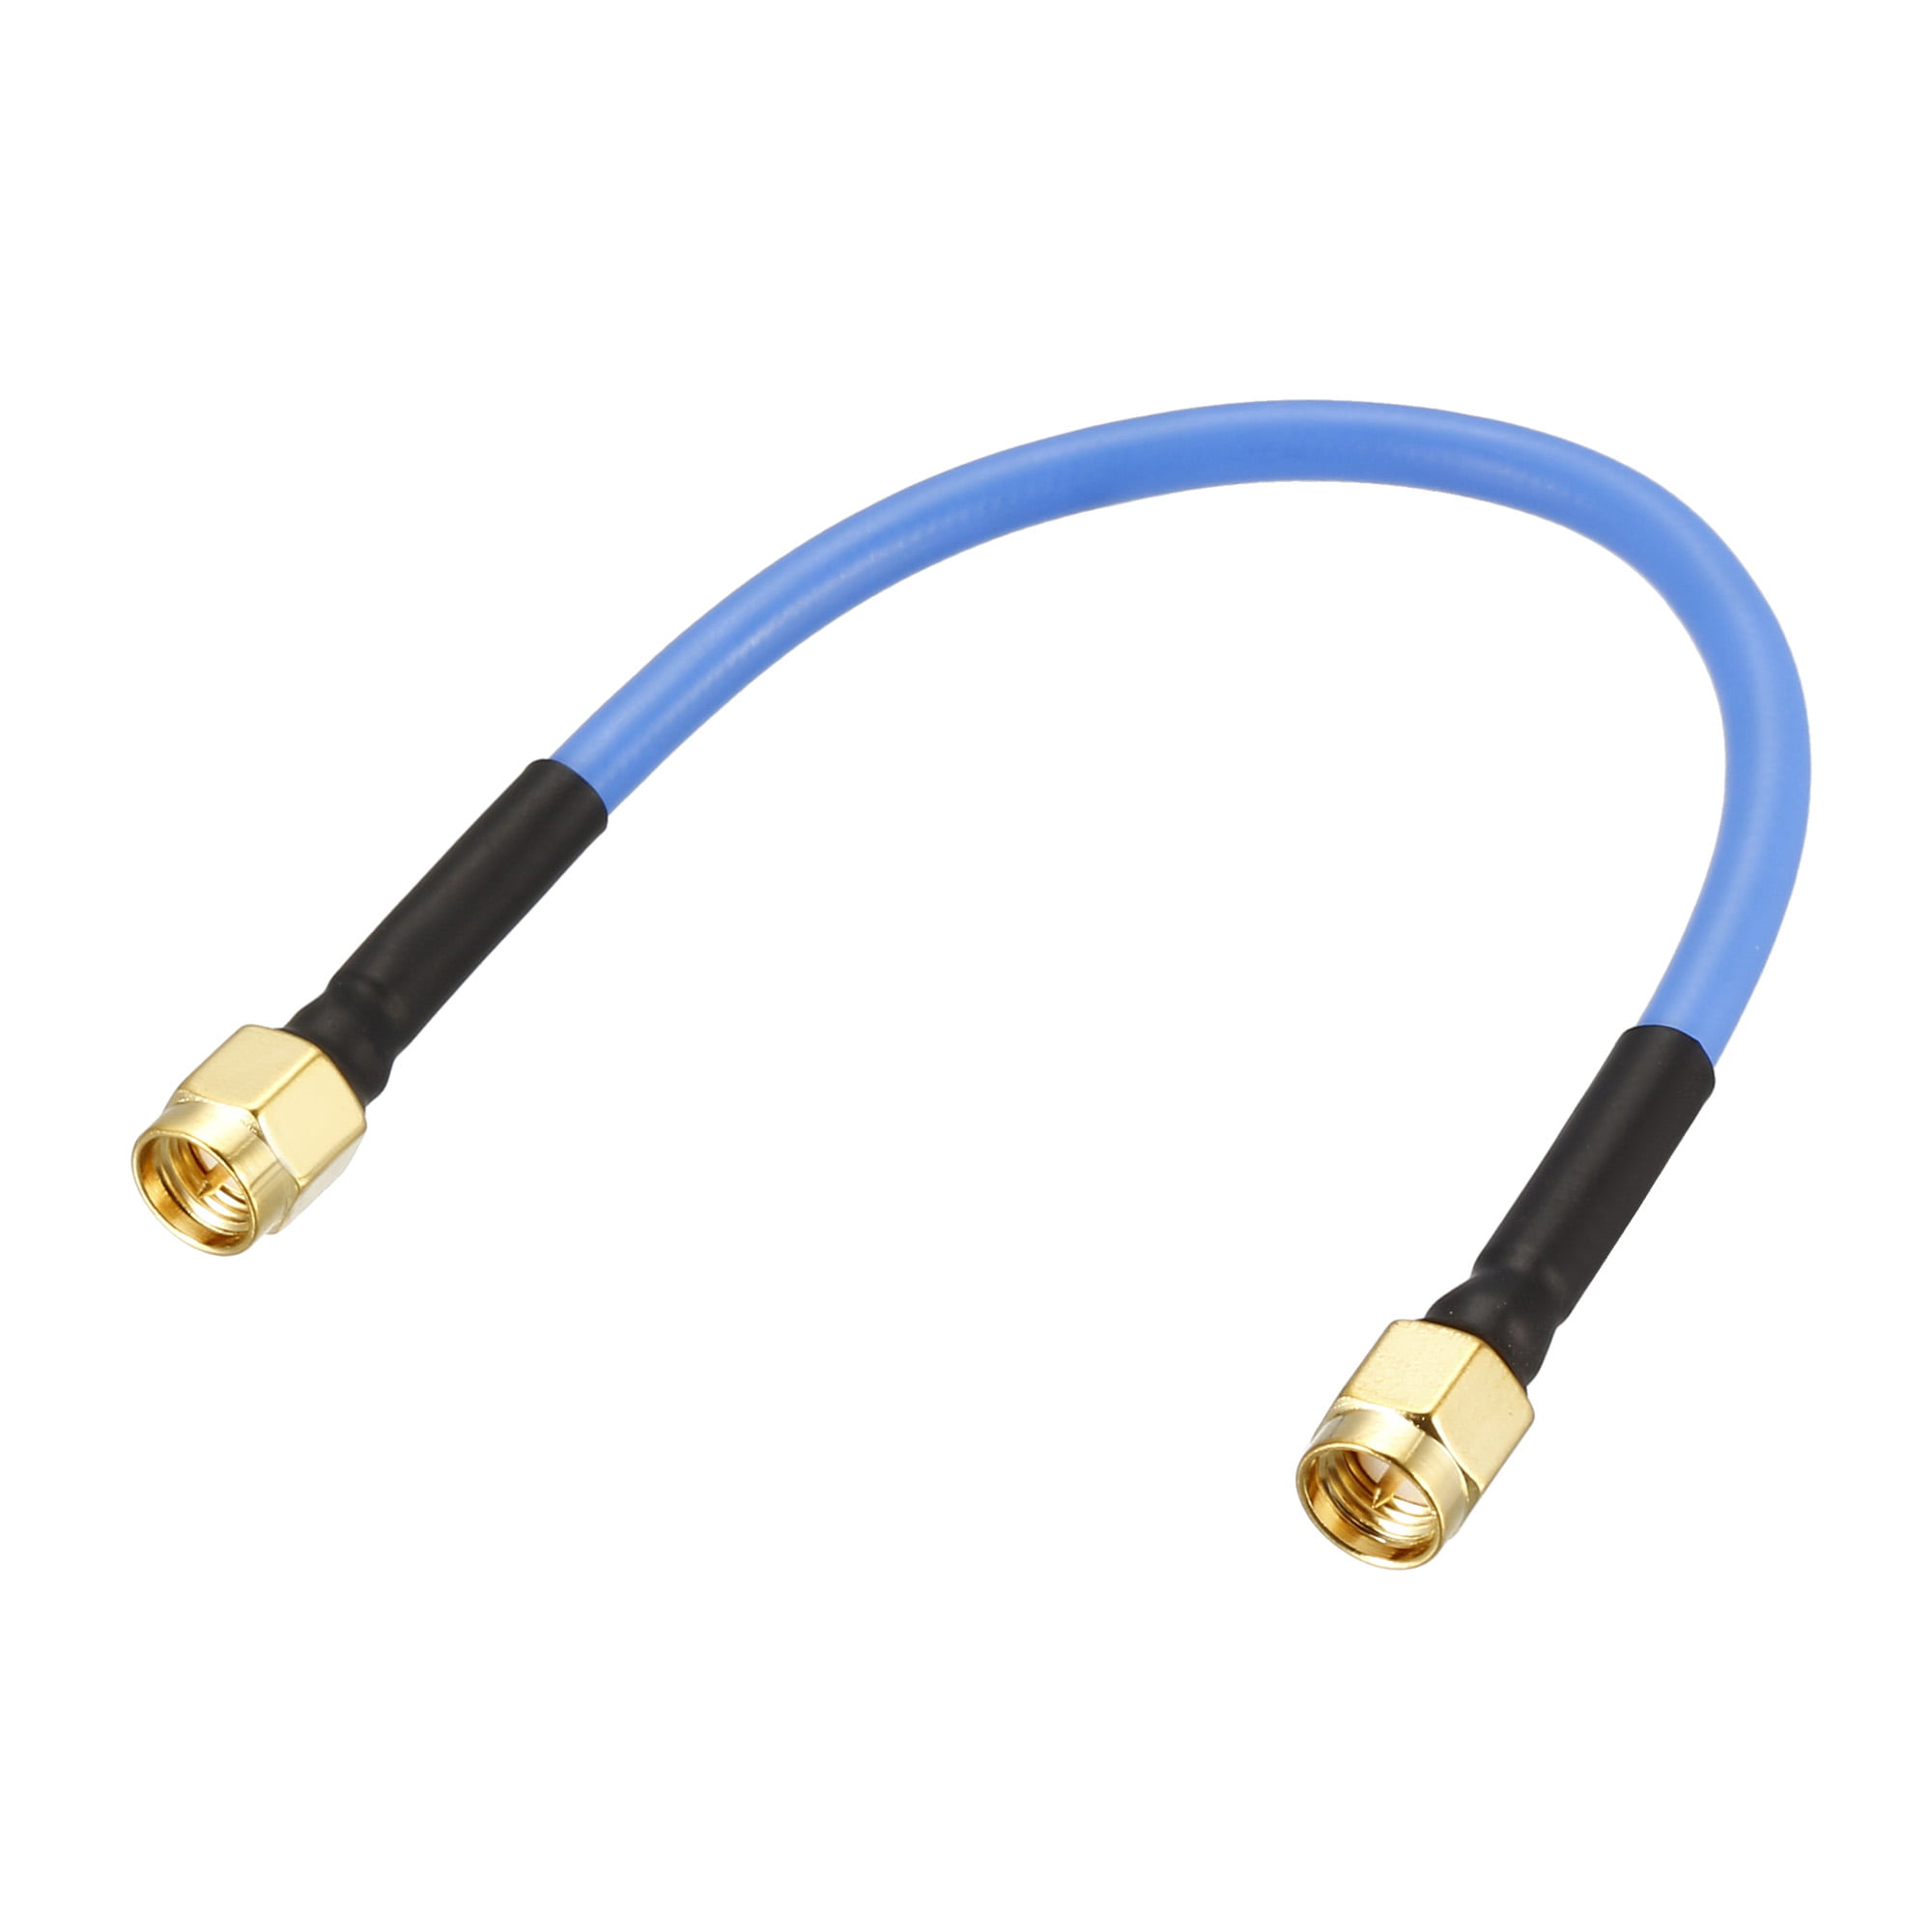 1ft Rf Coaxial Cable Terminal Connector BNC Plug Straight to SMA Male Right Angle Rg174 15cm for Instrument and Computer Networking Ships from USA